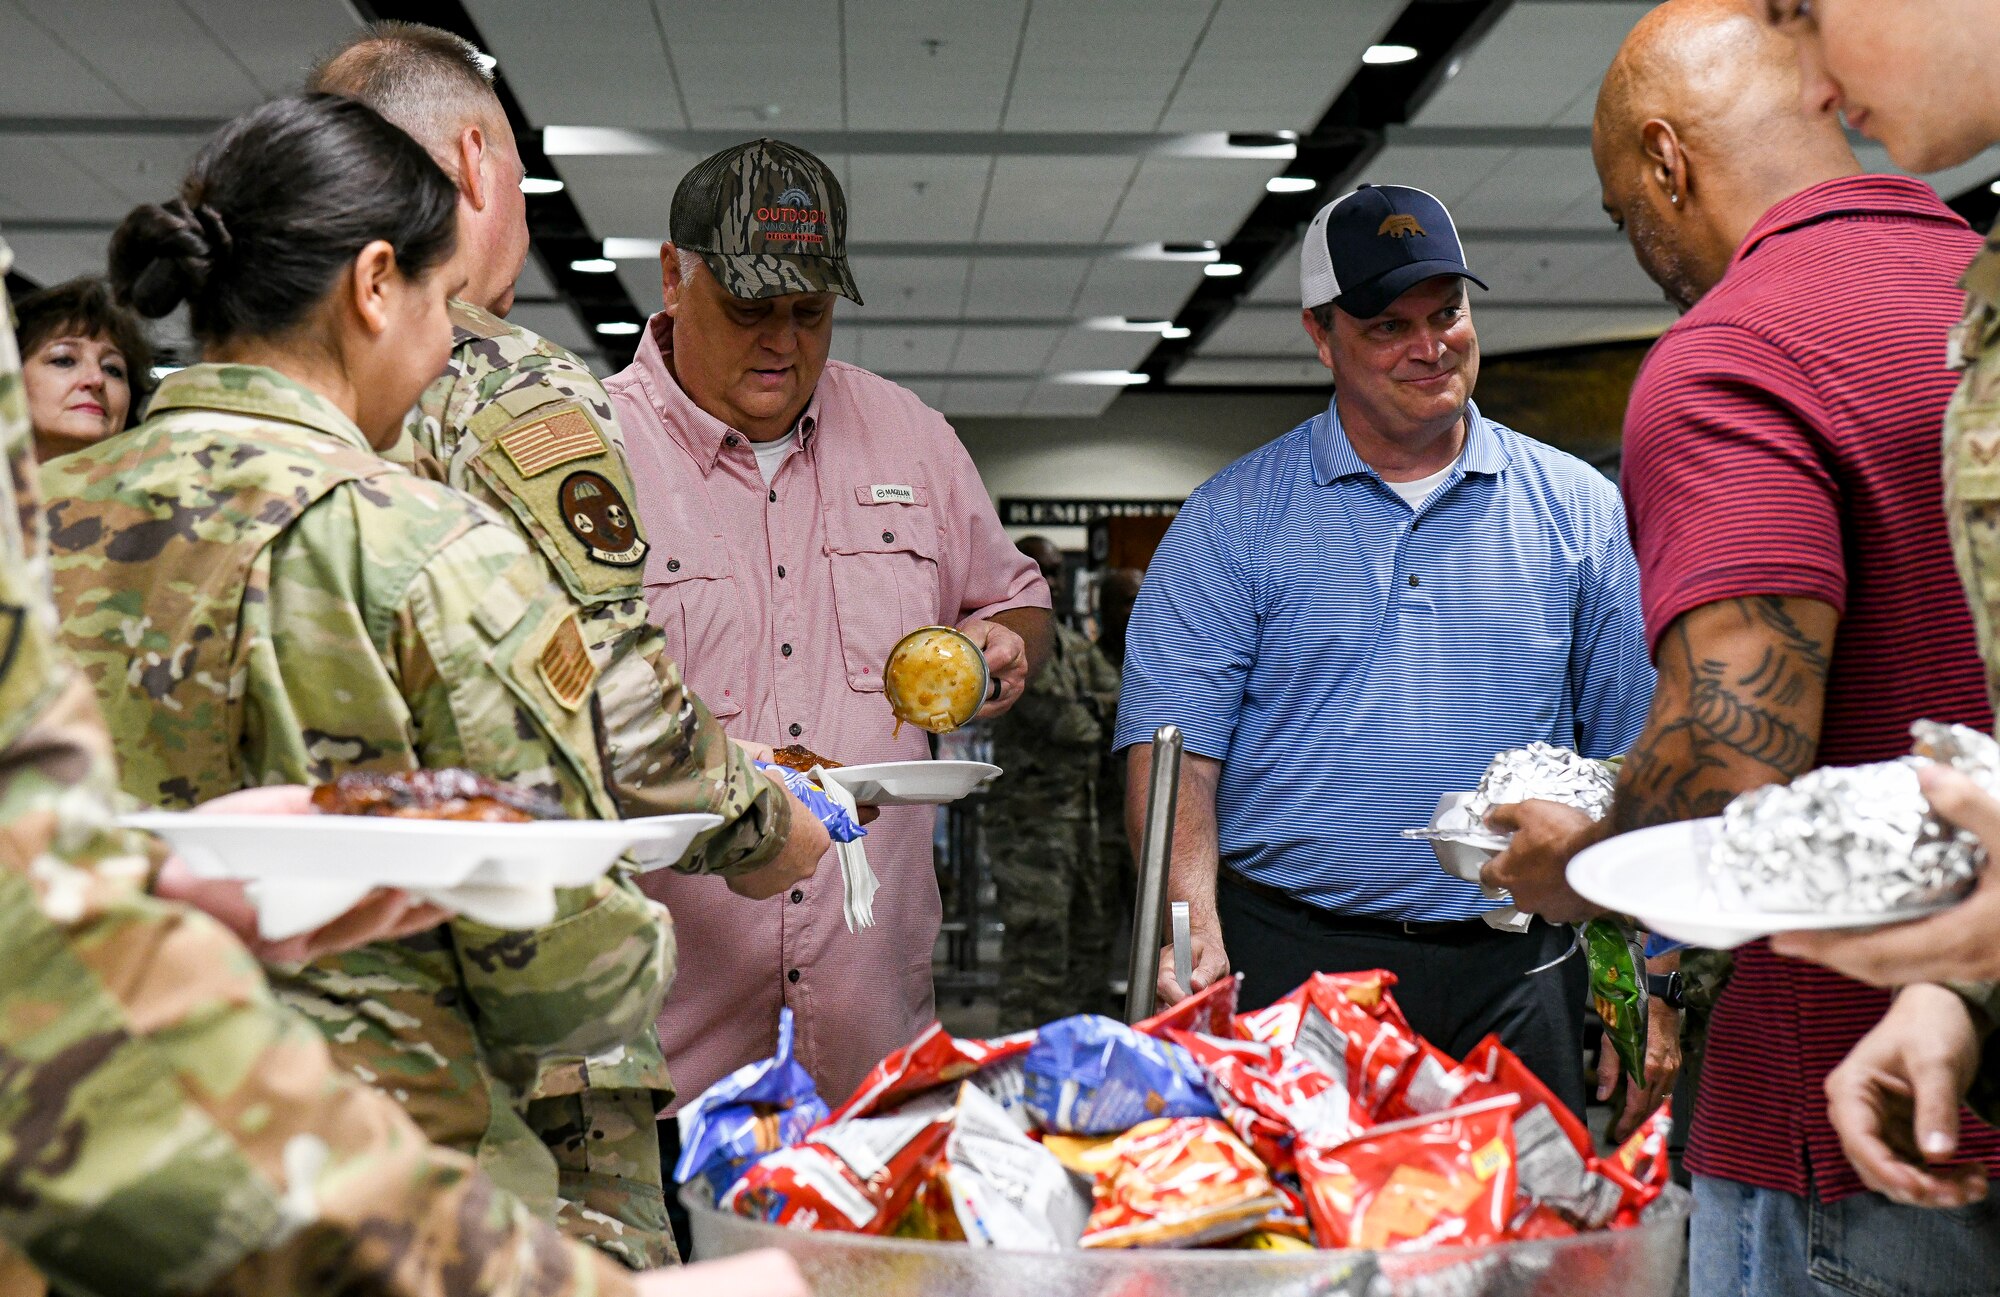 Former and present commanders and command chief master sergeants of the 172nd Airlift Wing gathered to serve lunch to Airmen and full-time staff at the Wing’s dining facility on April 6, 2022. (U.S. Air National Guard photo by 1st Lt. Kiara Spann)